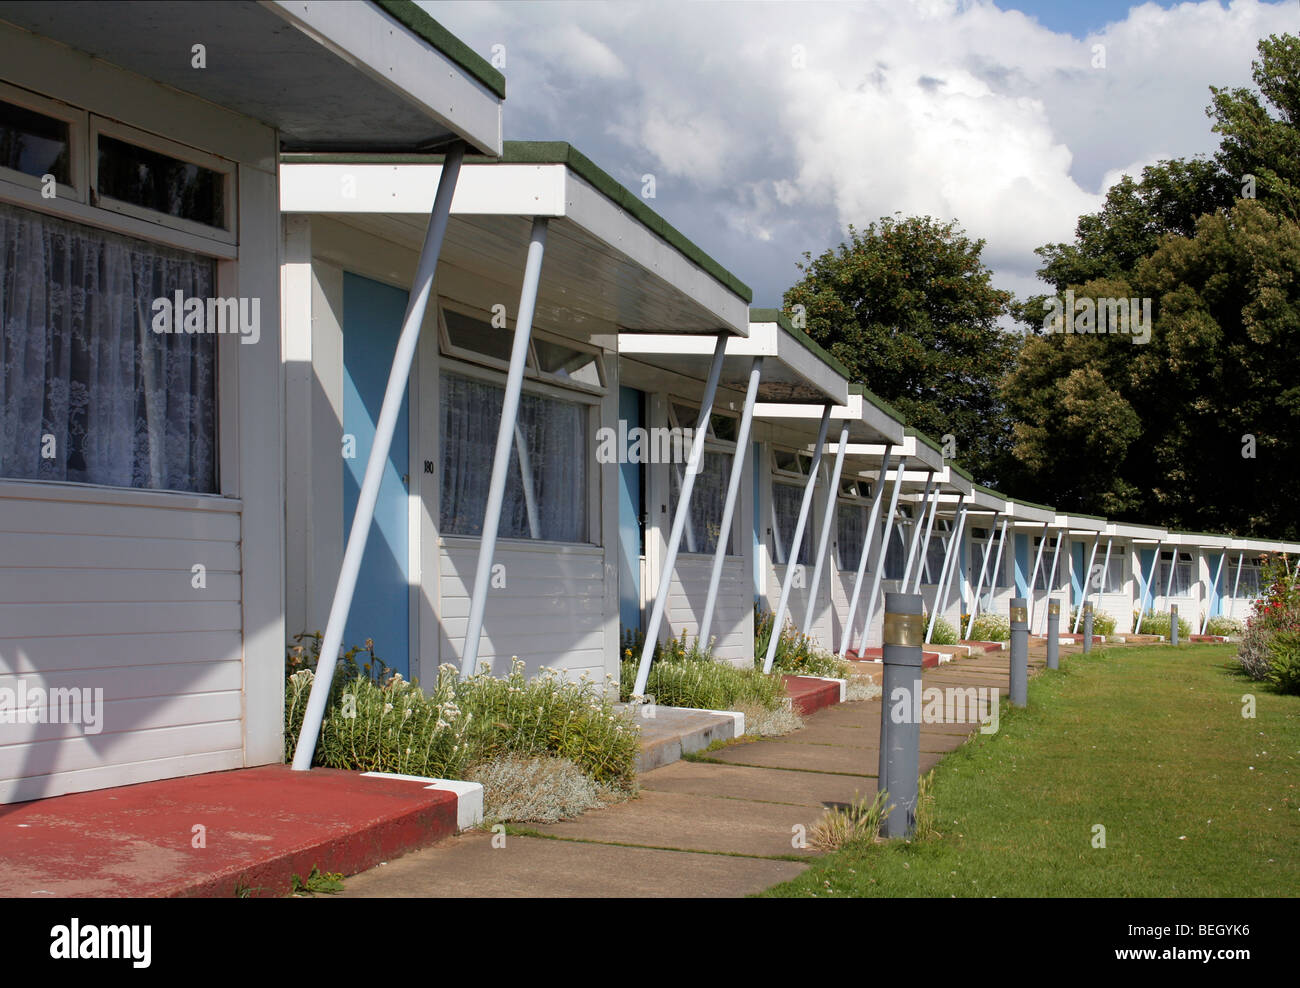 Typical British 50's style Holiday camp chalet, Ideal for the disabled. Stock Photo